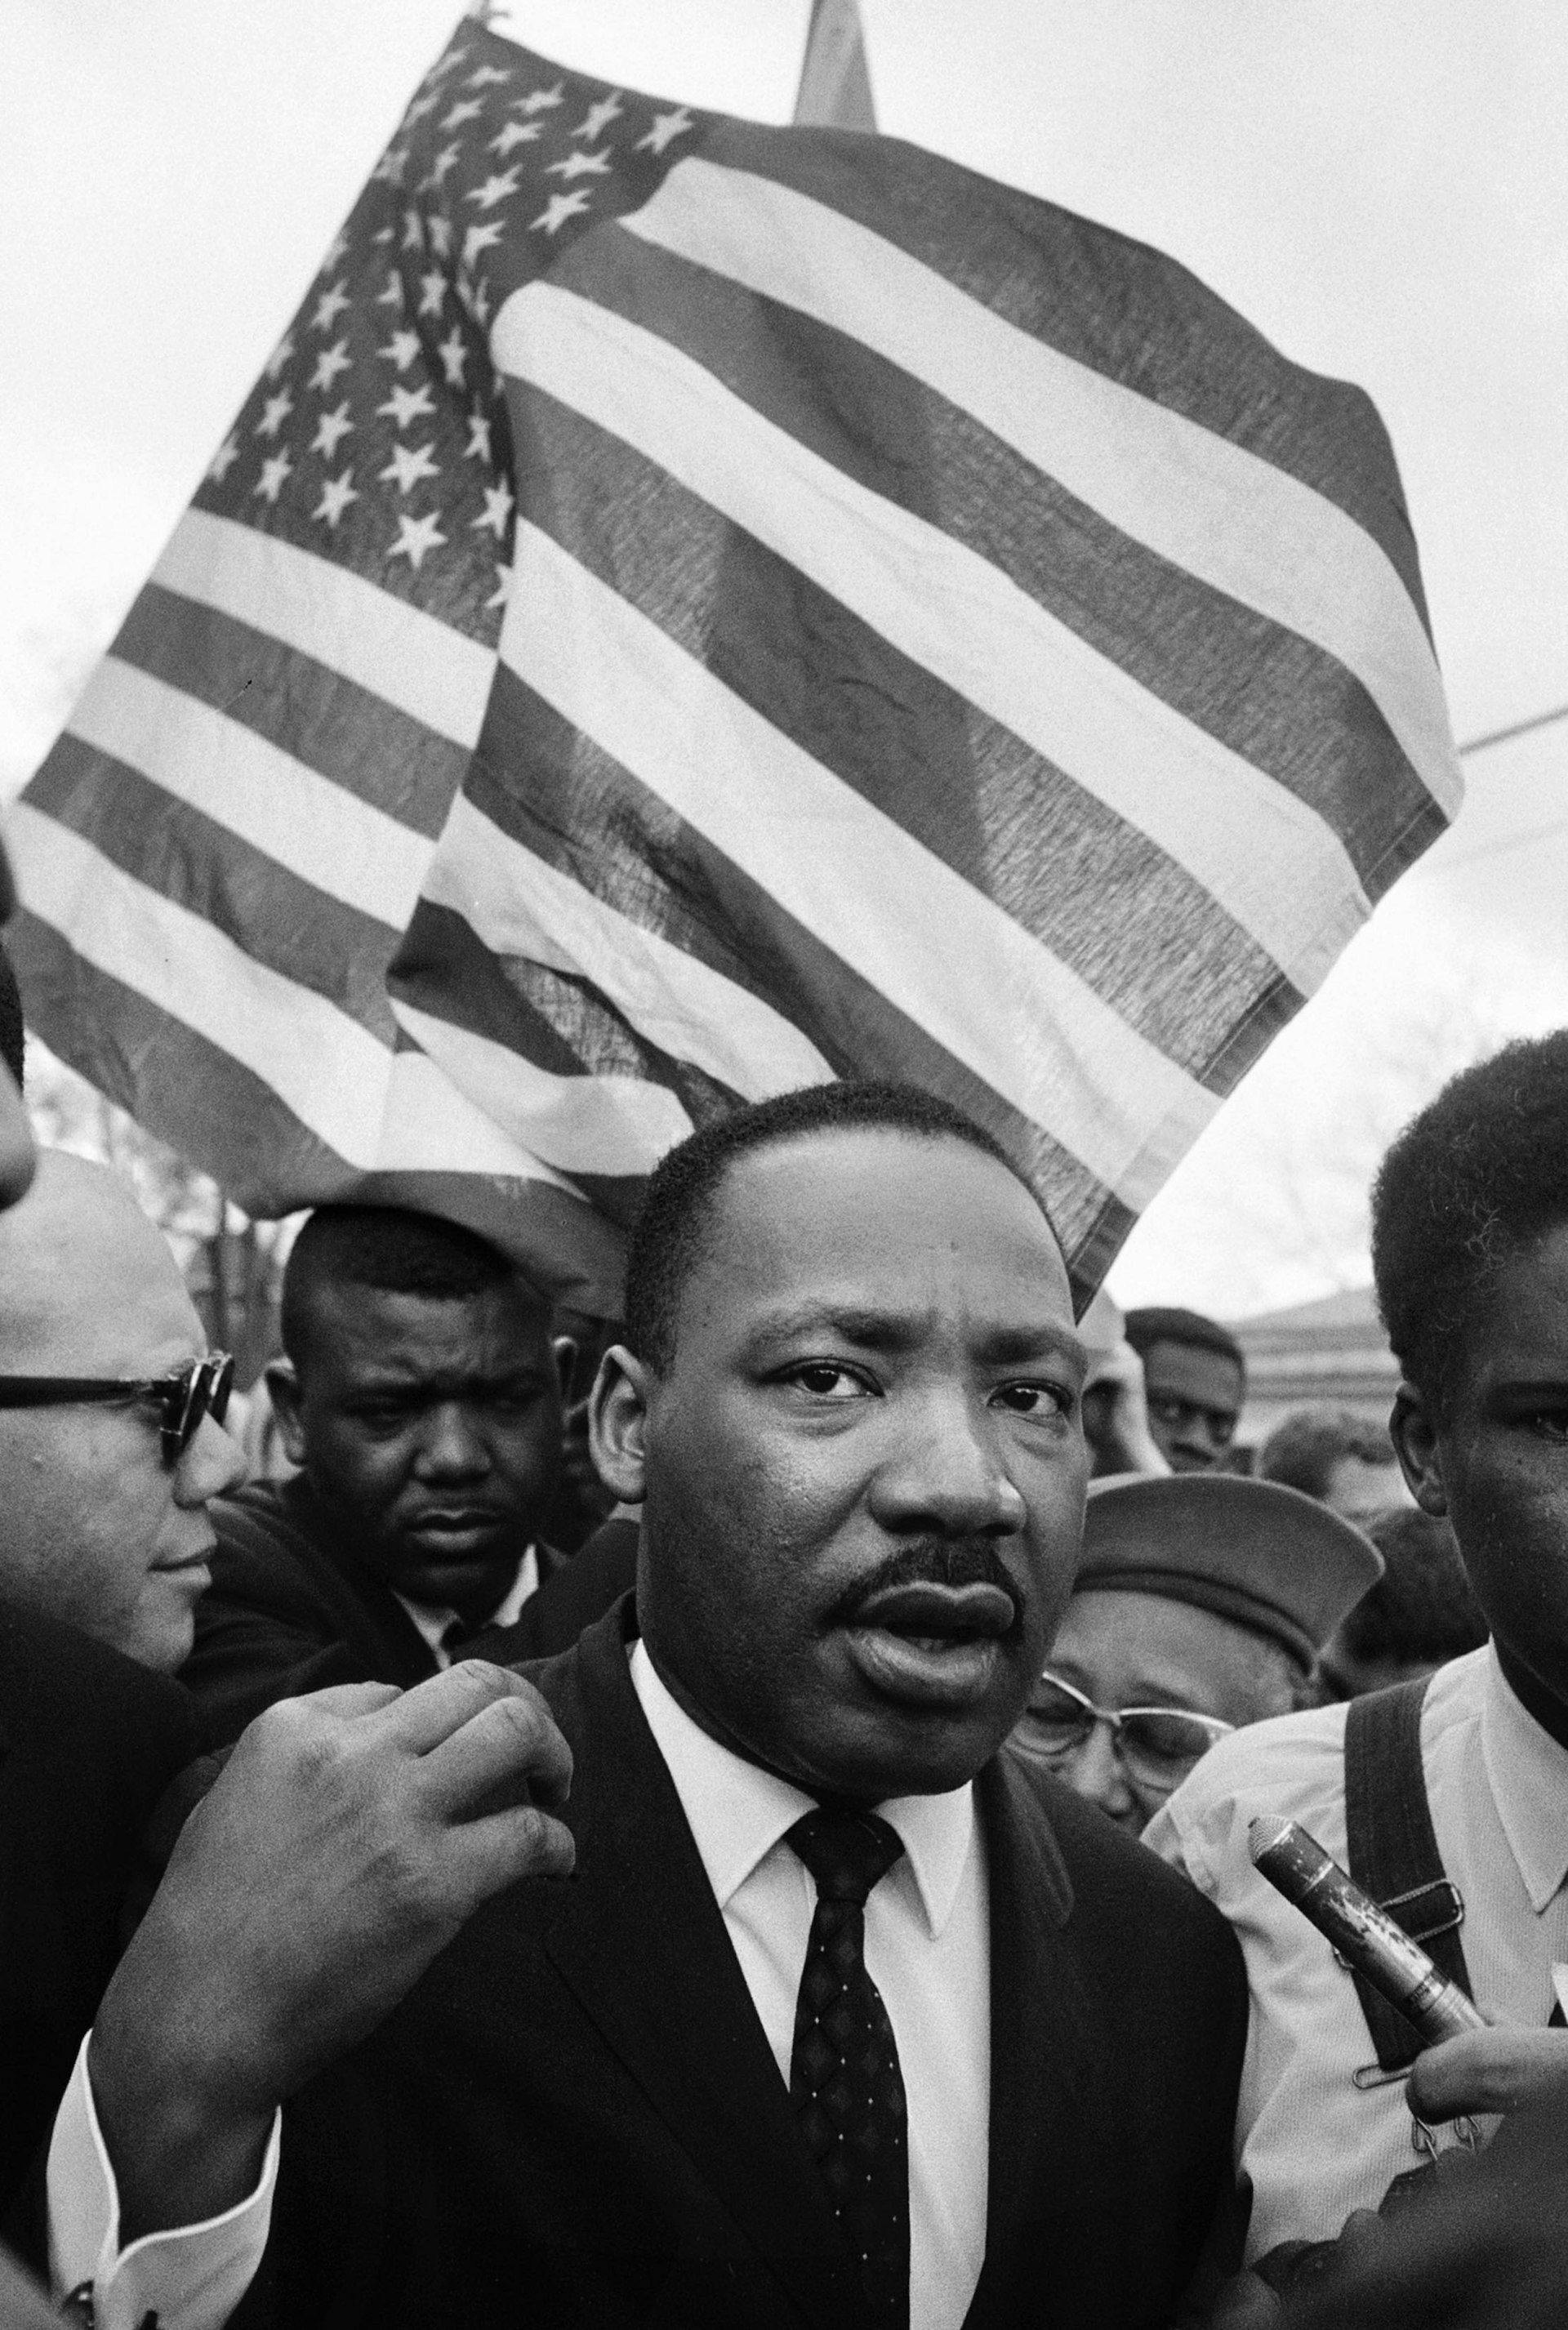 Martin Luther King with Flag, Selma March 1965 © Steve Schapiro